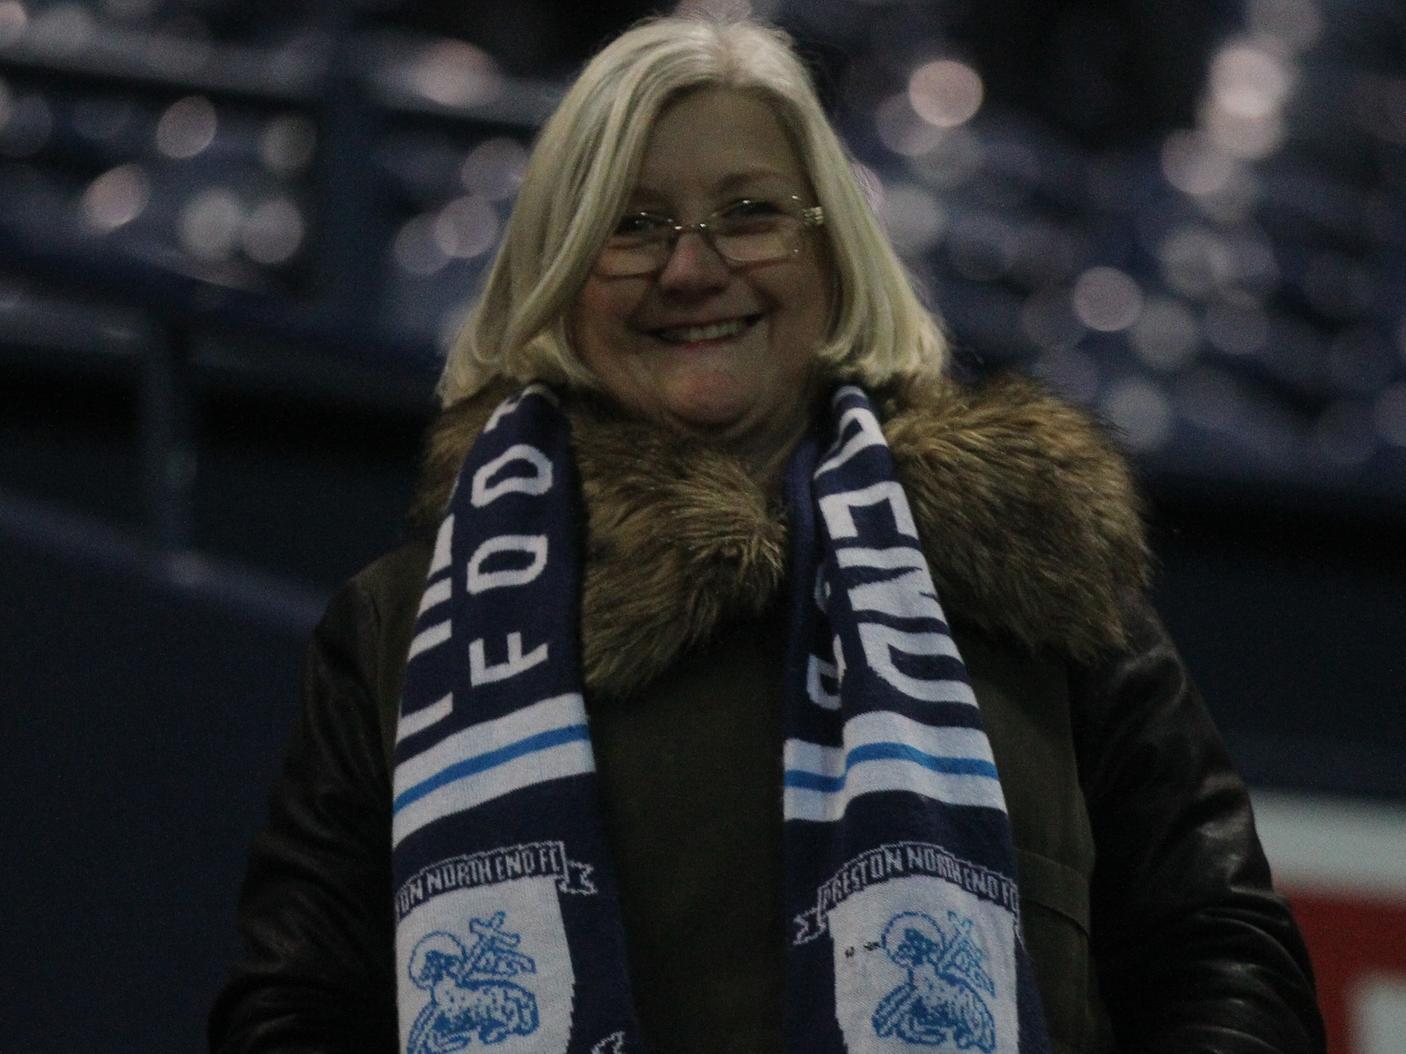 North End fans were encouraged to bring their scarves last night for when the team came out and this PNE fan obliged.